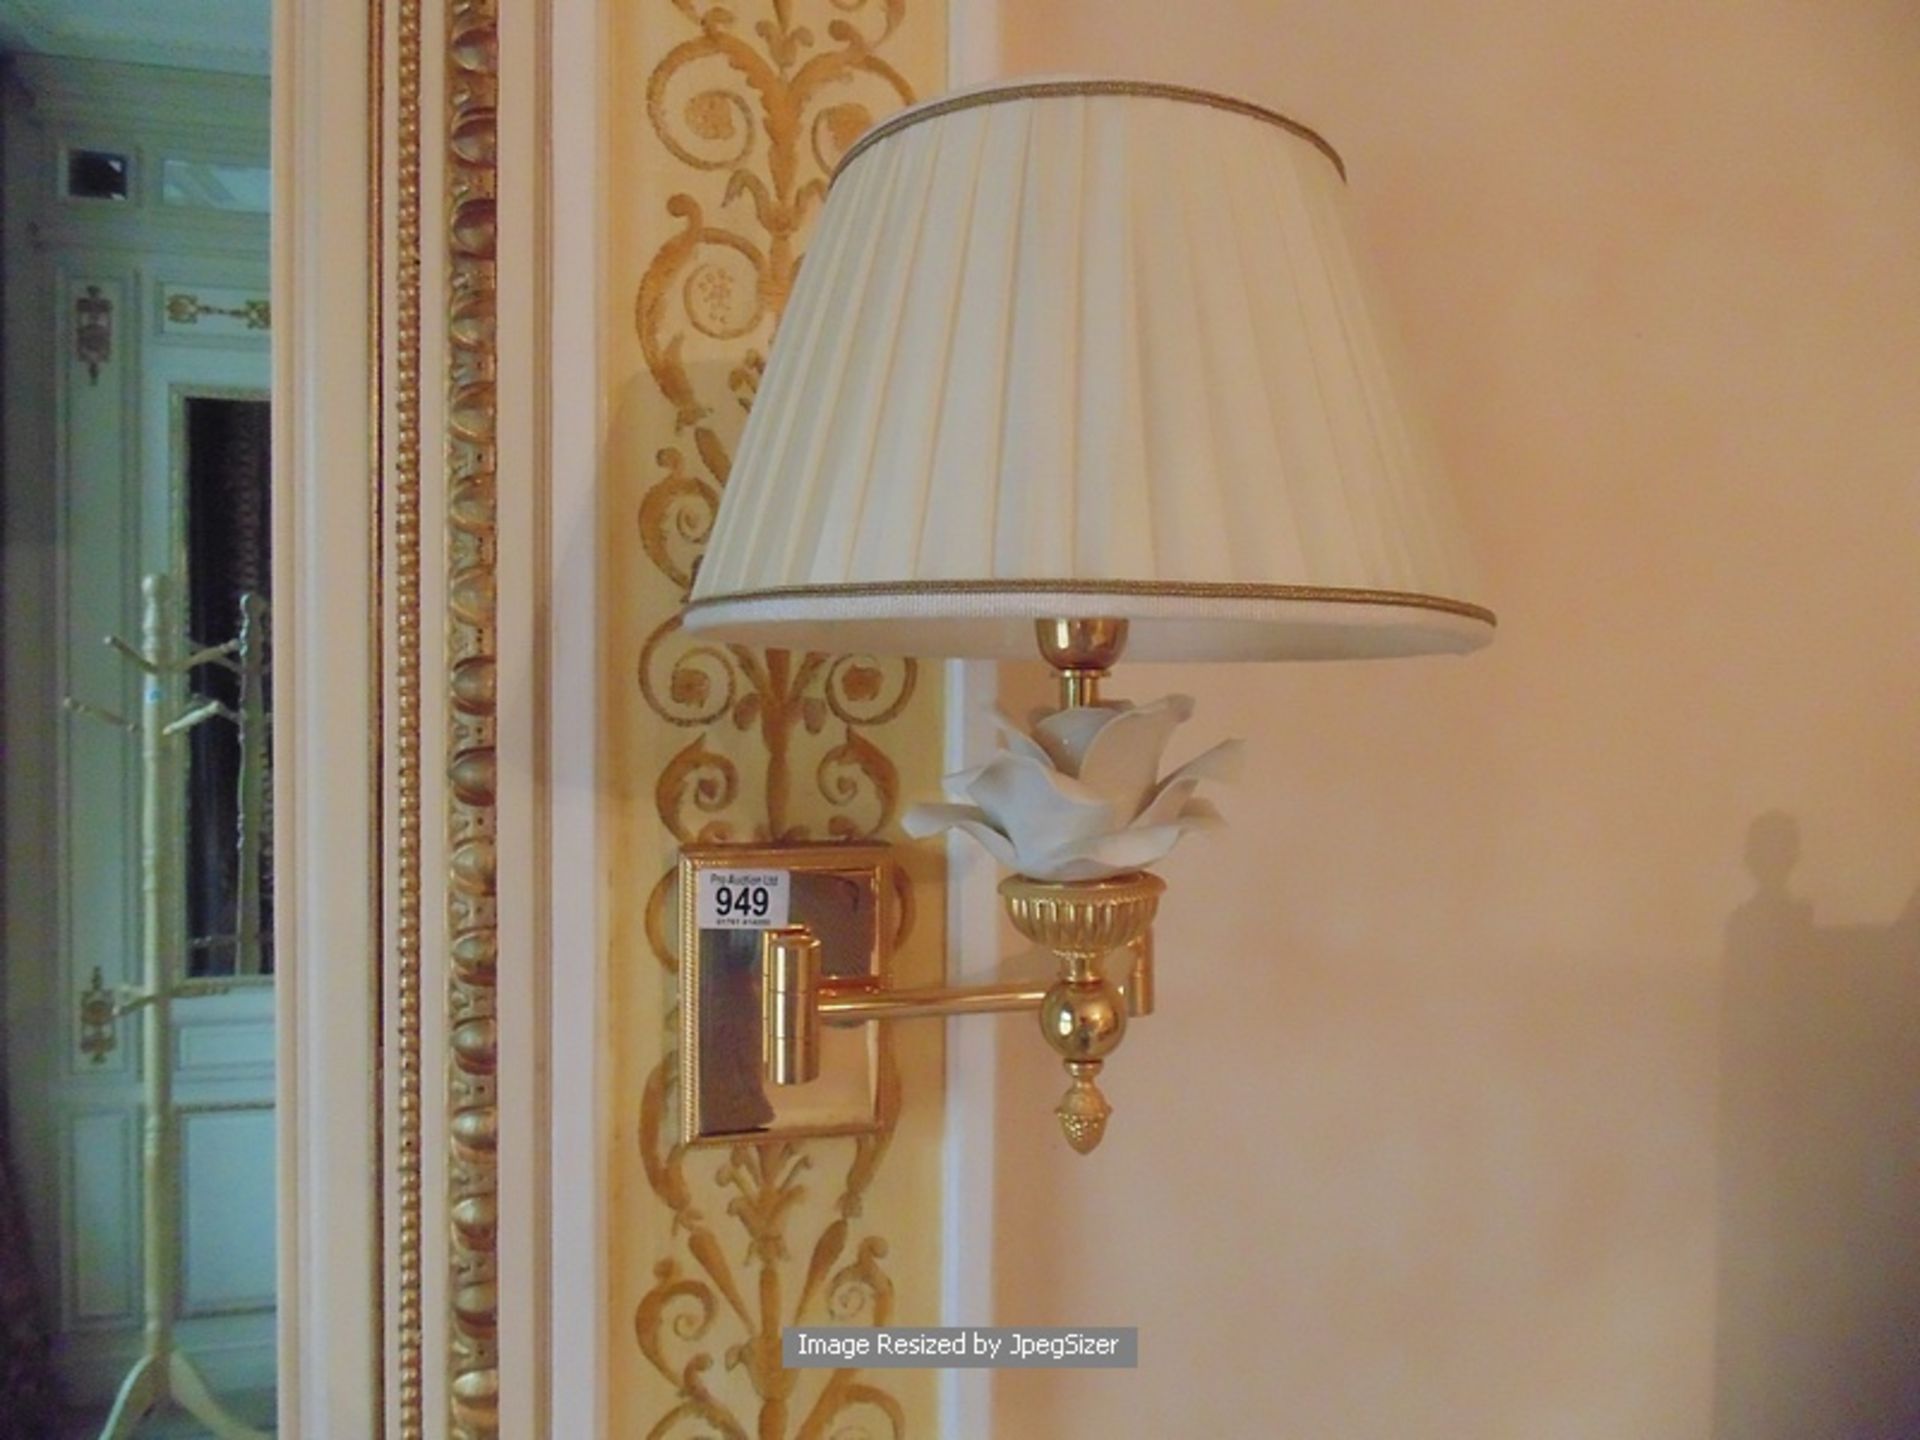 Laudarte T420 cantilever wall sconces bronze castings, with Capodimonte roses in white 24ct. gold